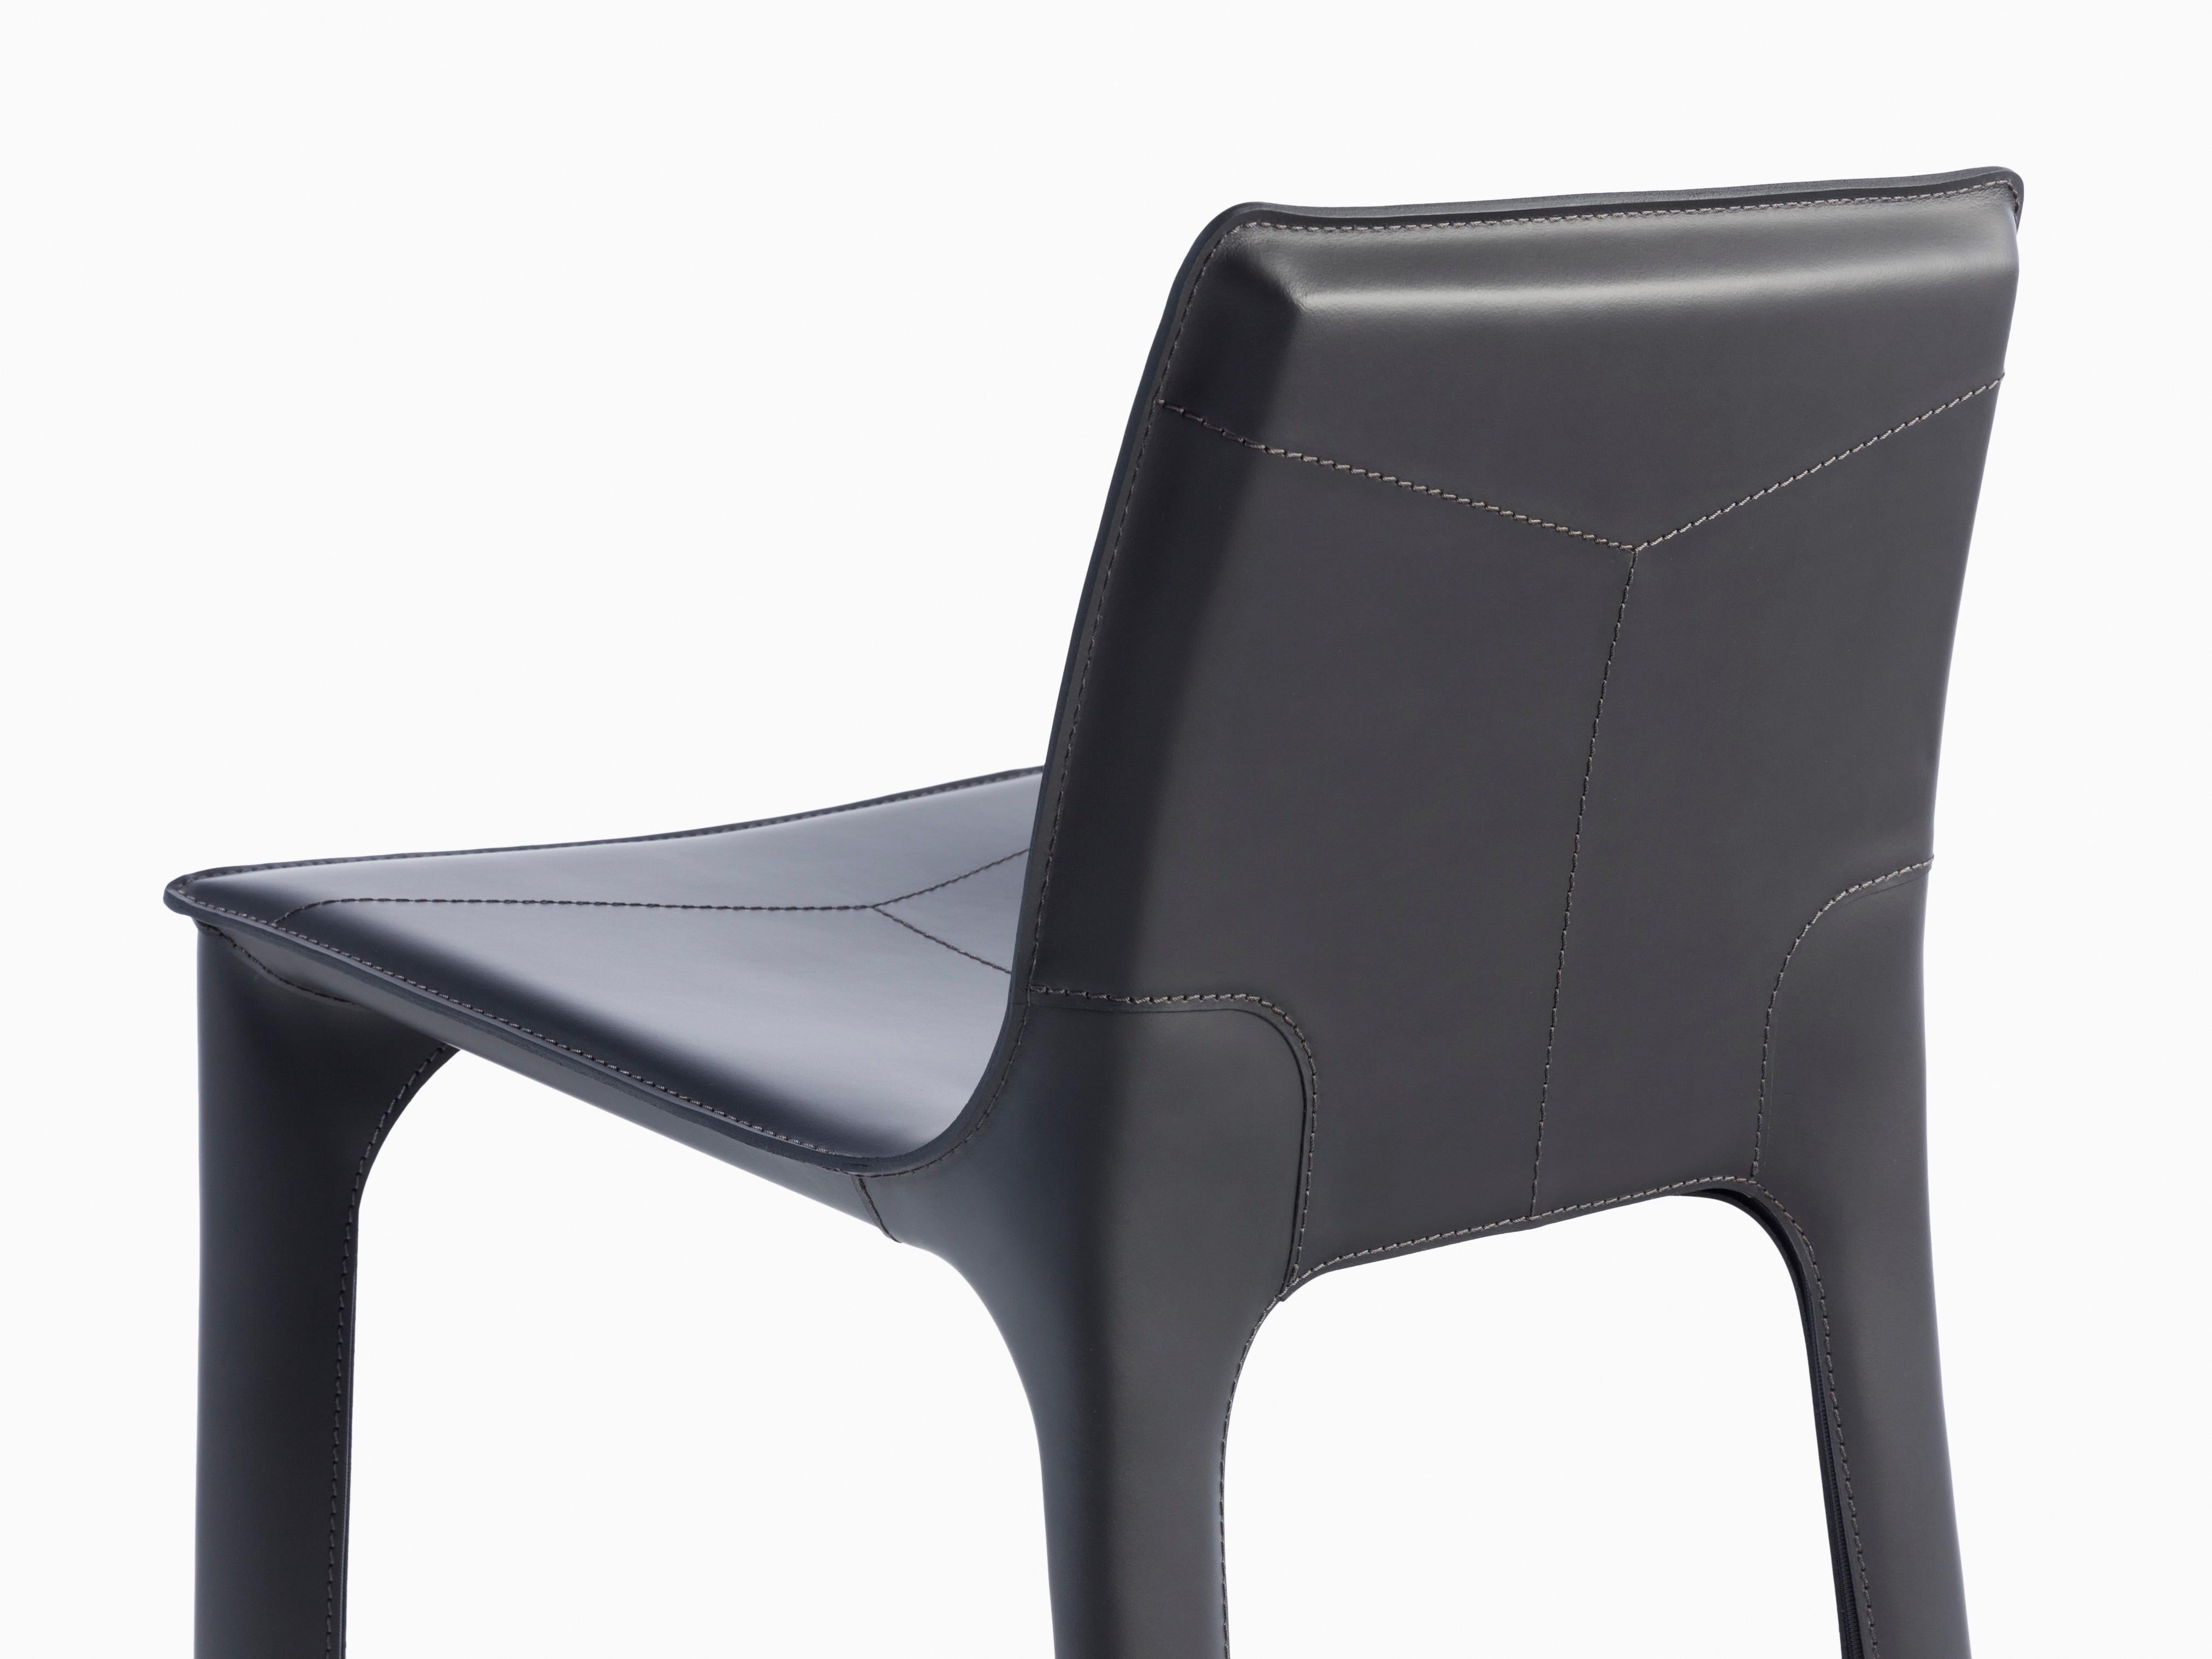 Modern HOLLY HUNT Adriatic Counterstool in Matte Black and Dark Grey Leather